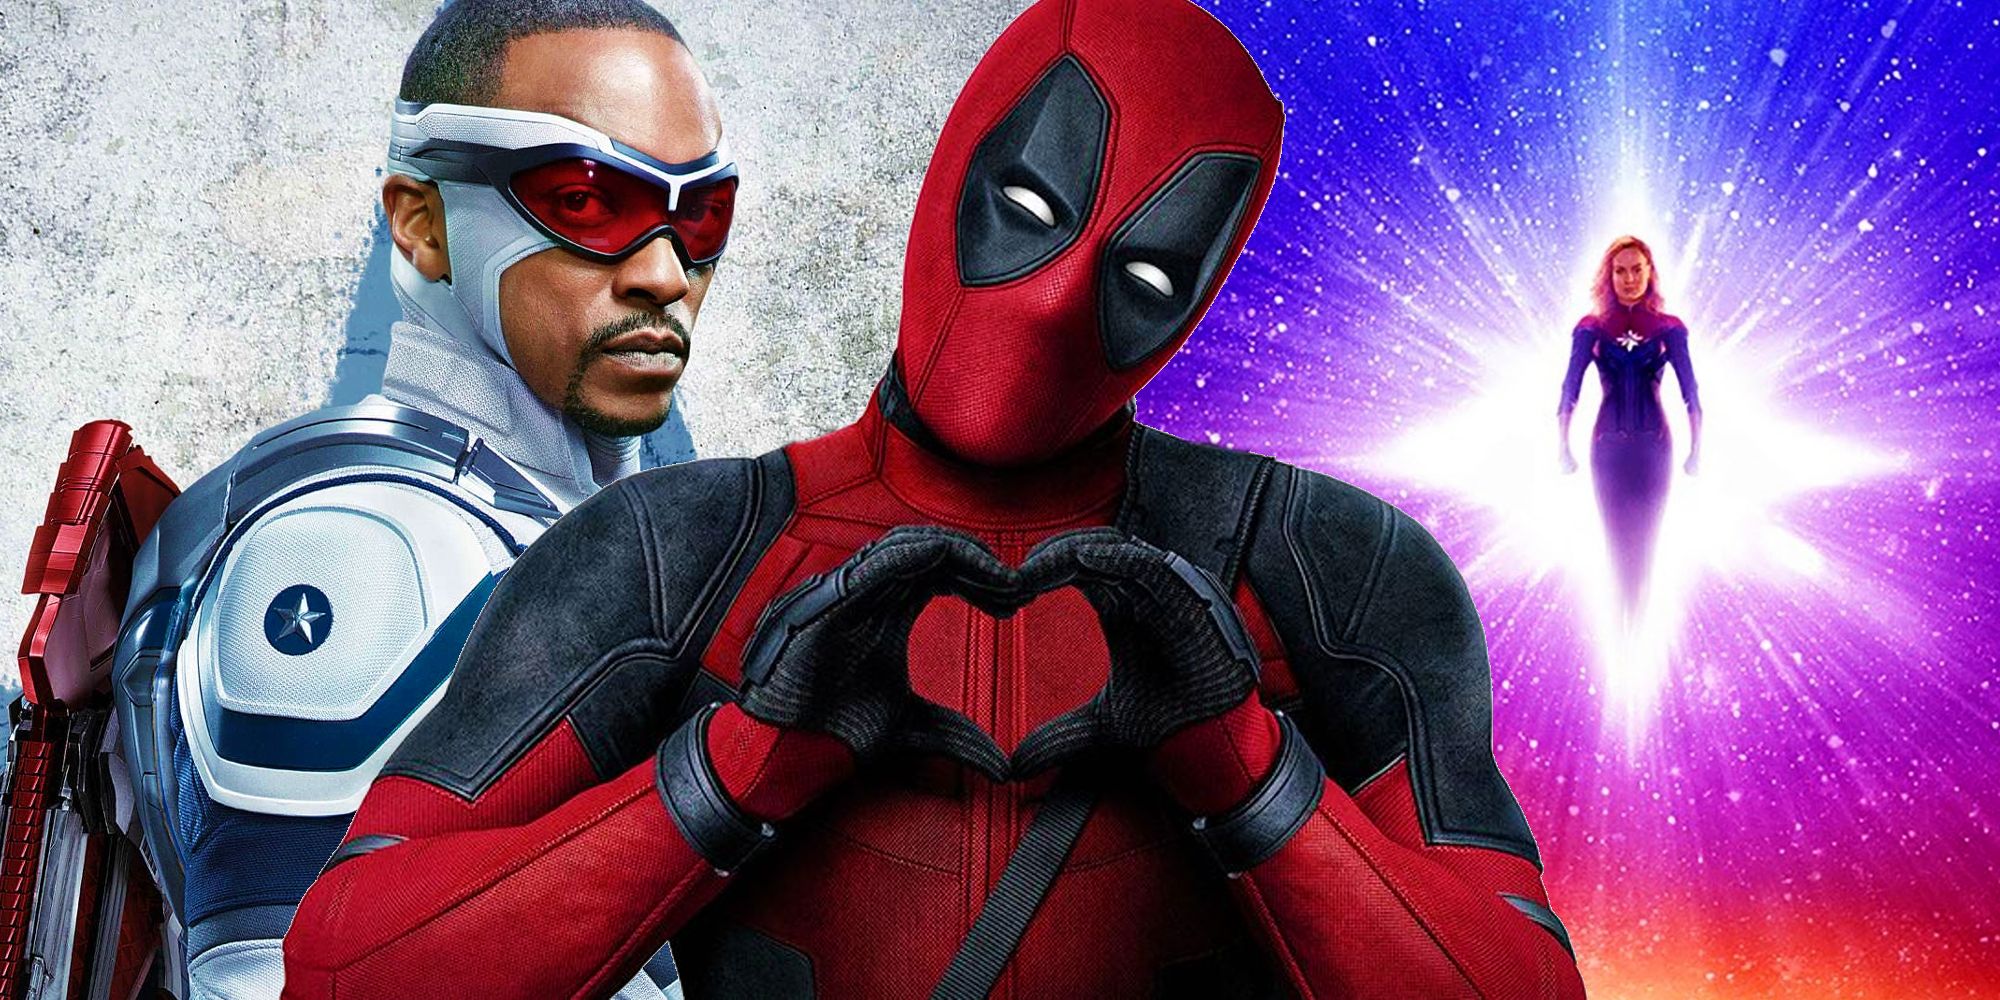 Deadpool making a heart with his hands next to Sam Wilson's Captain America and The Marvels' poster